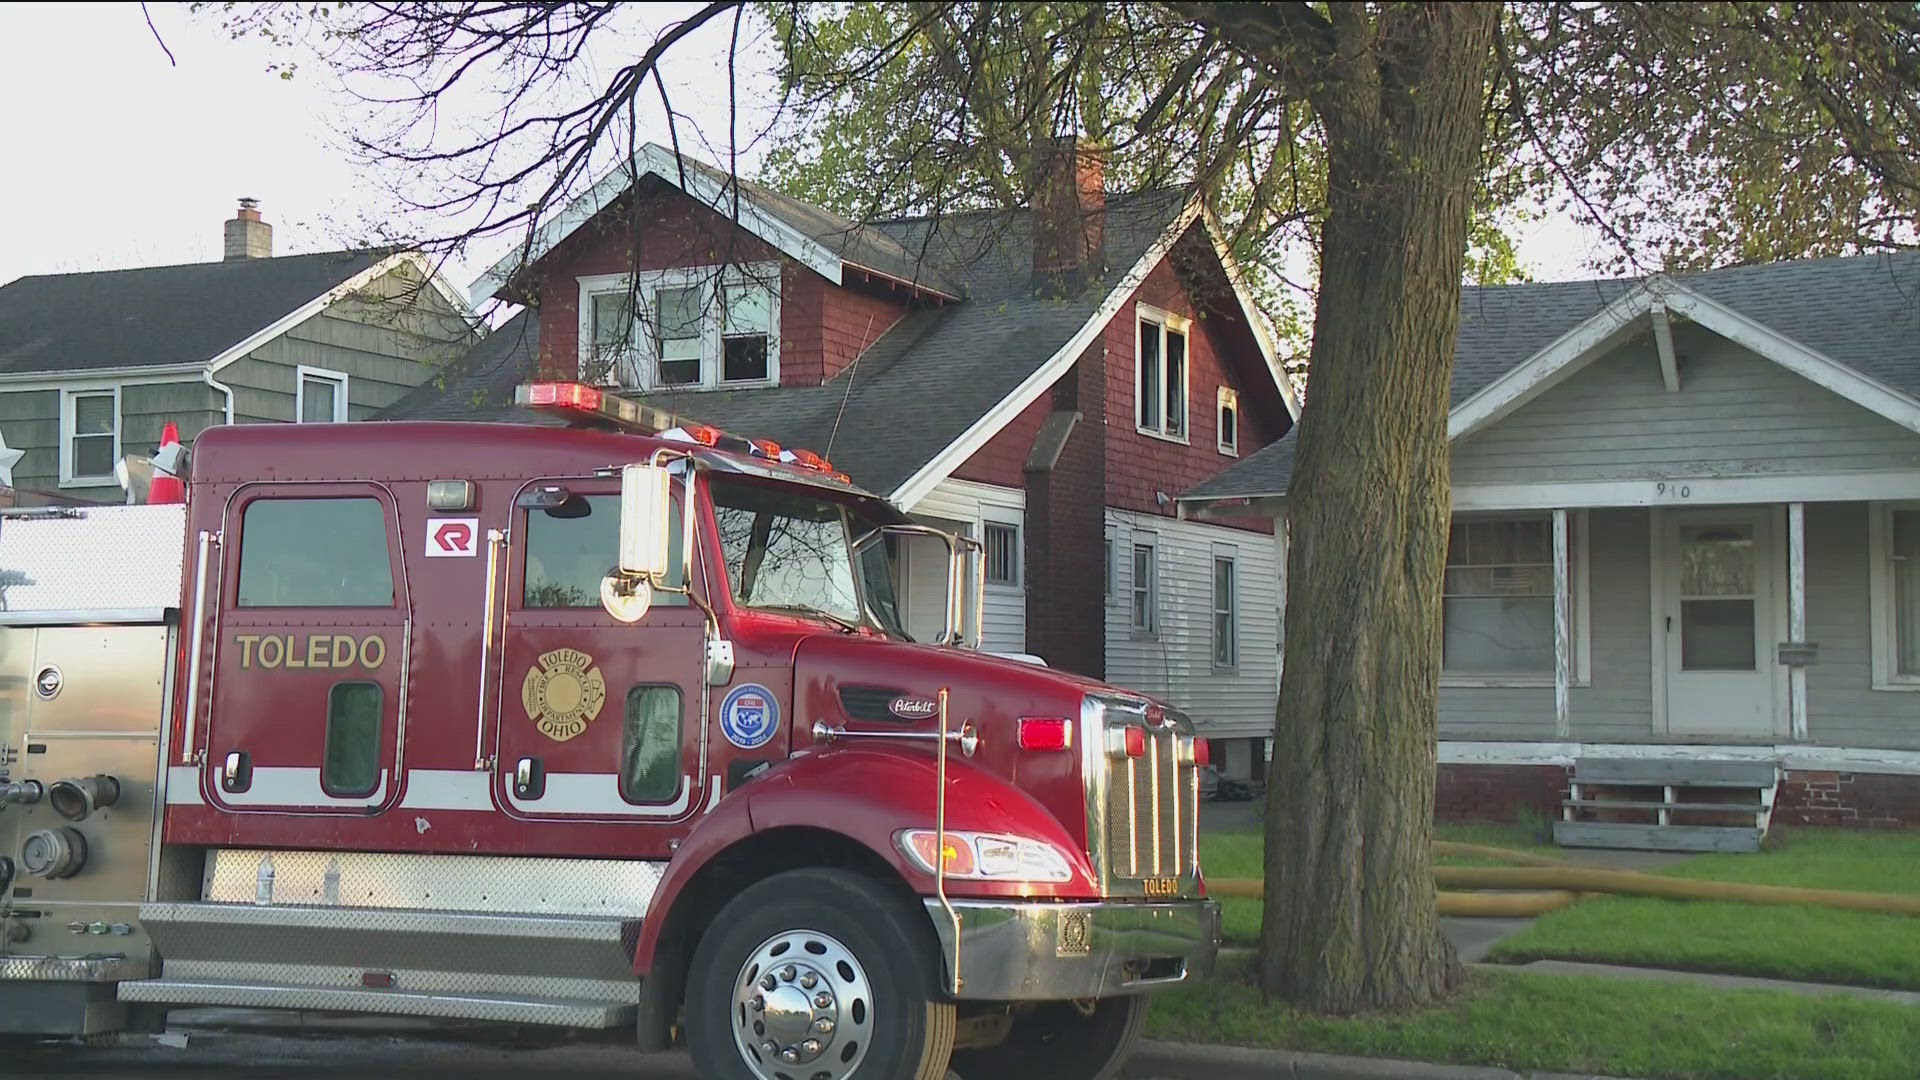 The Battalion Chief at the scene told WTOL two adults, two children, and their pet bunny were rescued from the home.